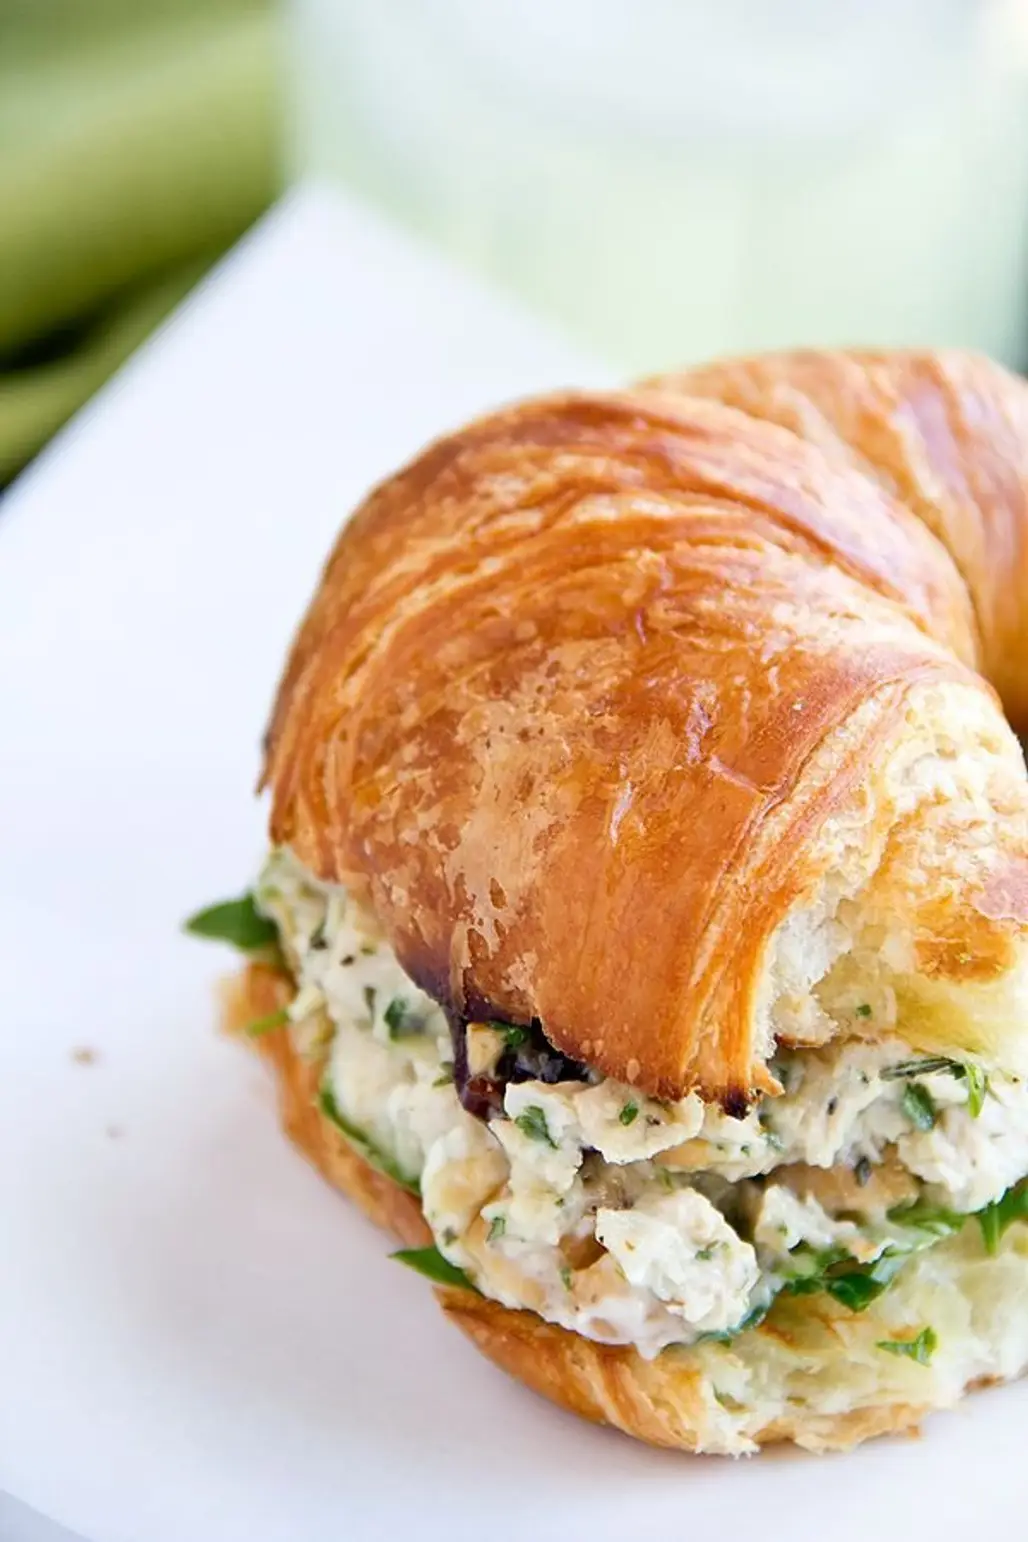 Here Are the 32 Best Tasting Picnic Sandwiches in the World ...